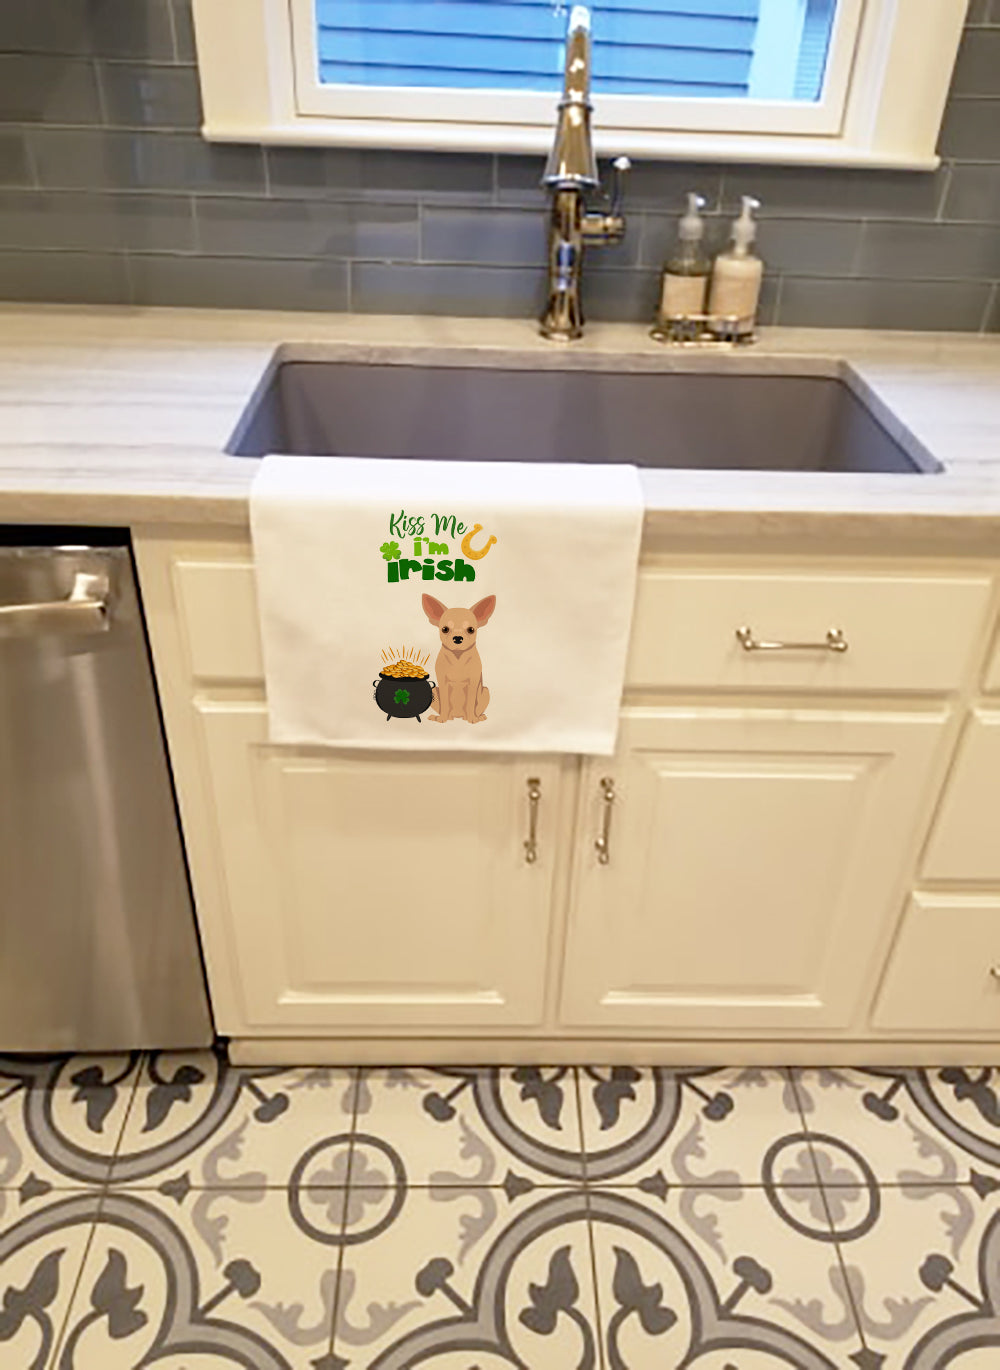 Buy this Fawn Chihuahua St. Patrick's Day White Kitchen Towel Set of 2 Dish Towels